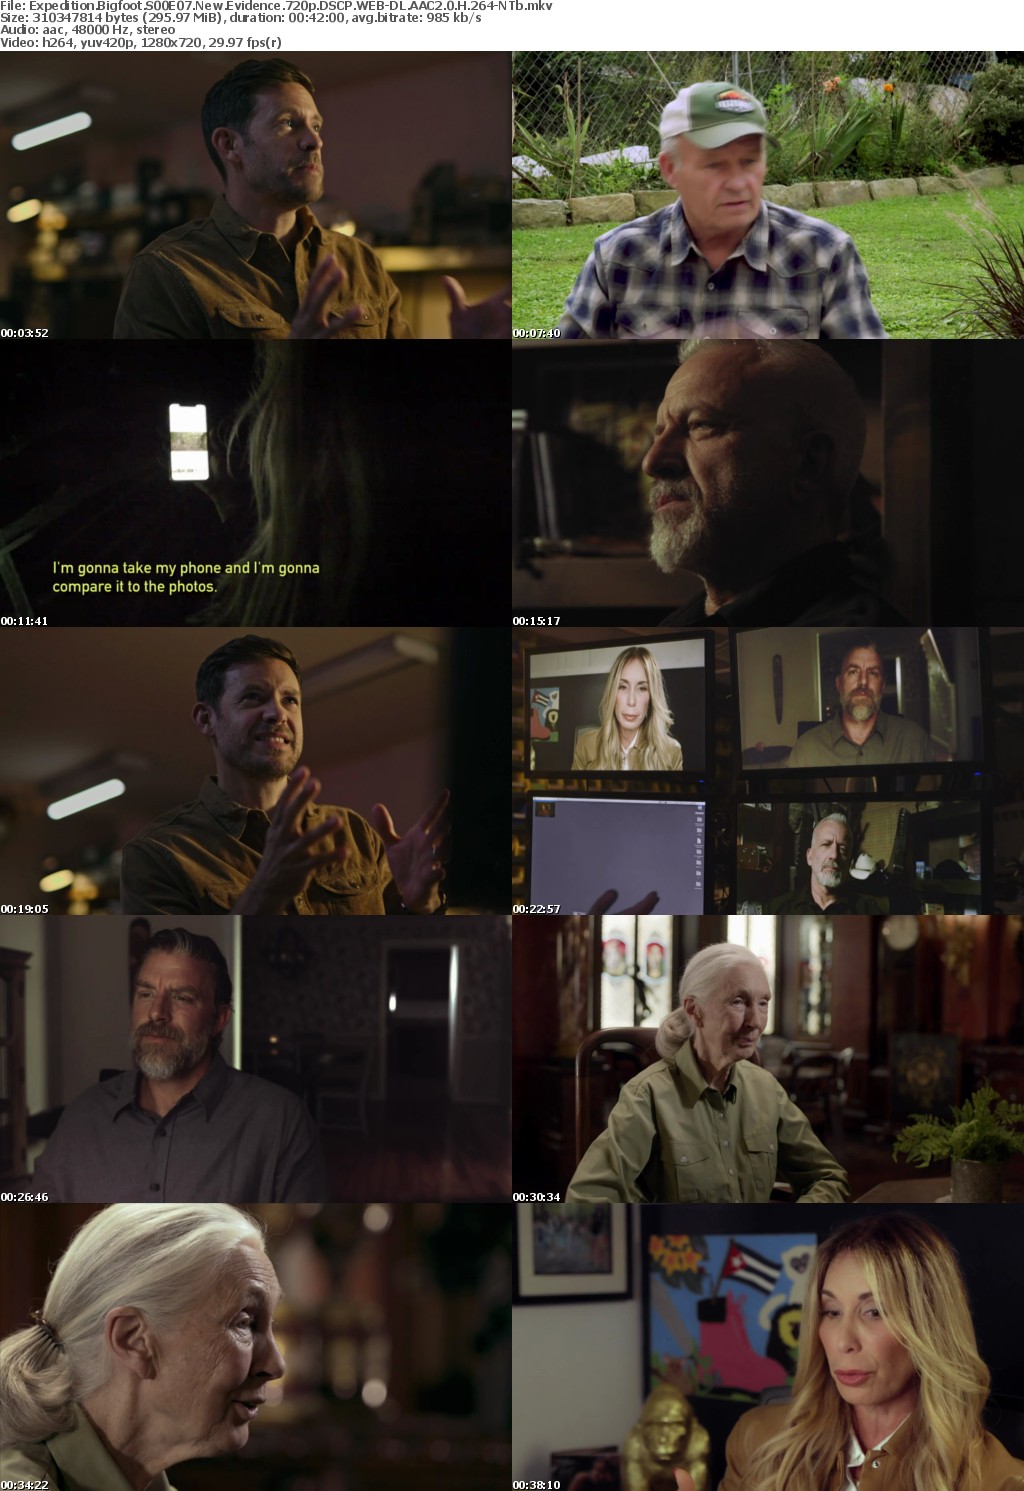 Expedition Bigfoot S00E07 New Evidence 720p DSCP WEB-DL AAC2 0 H 264-NTb